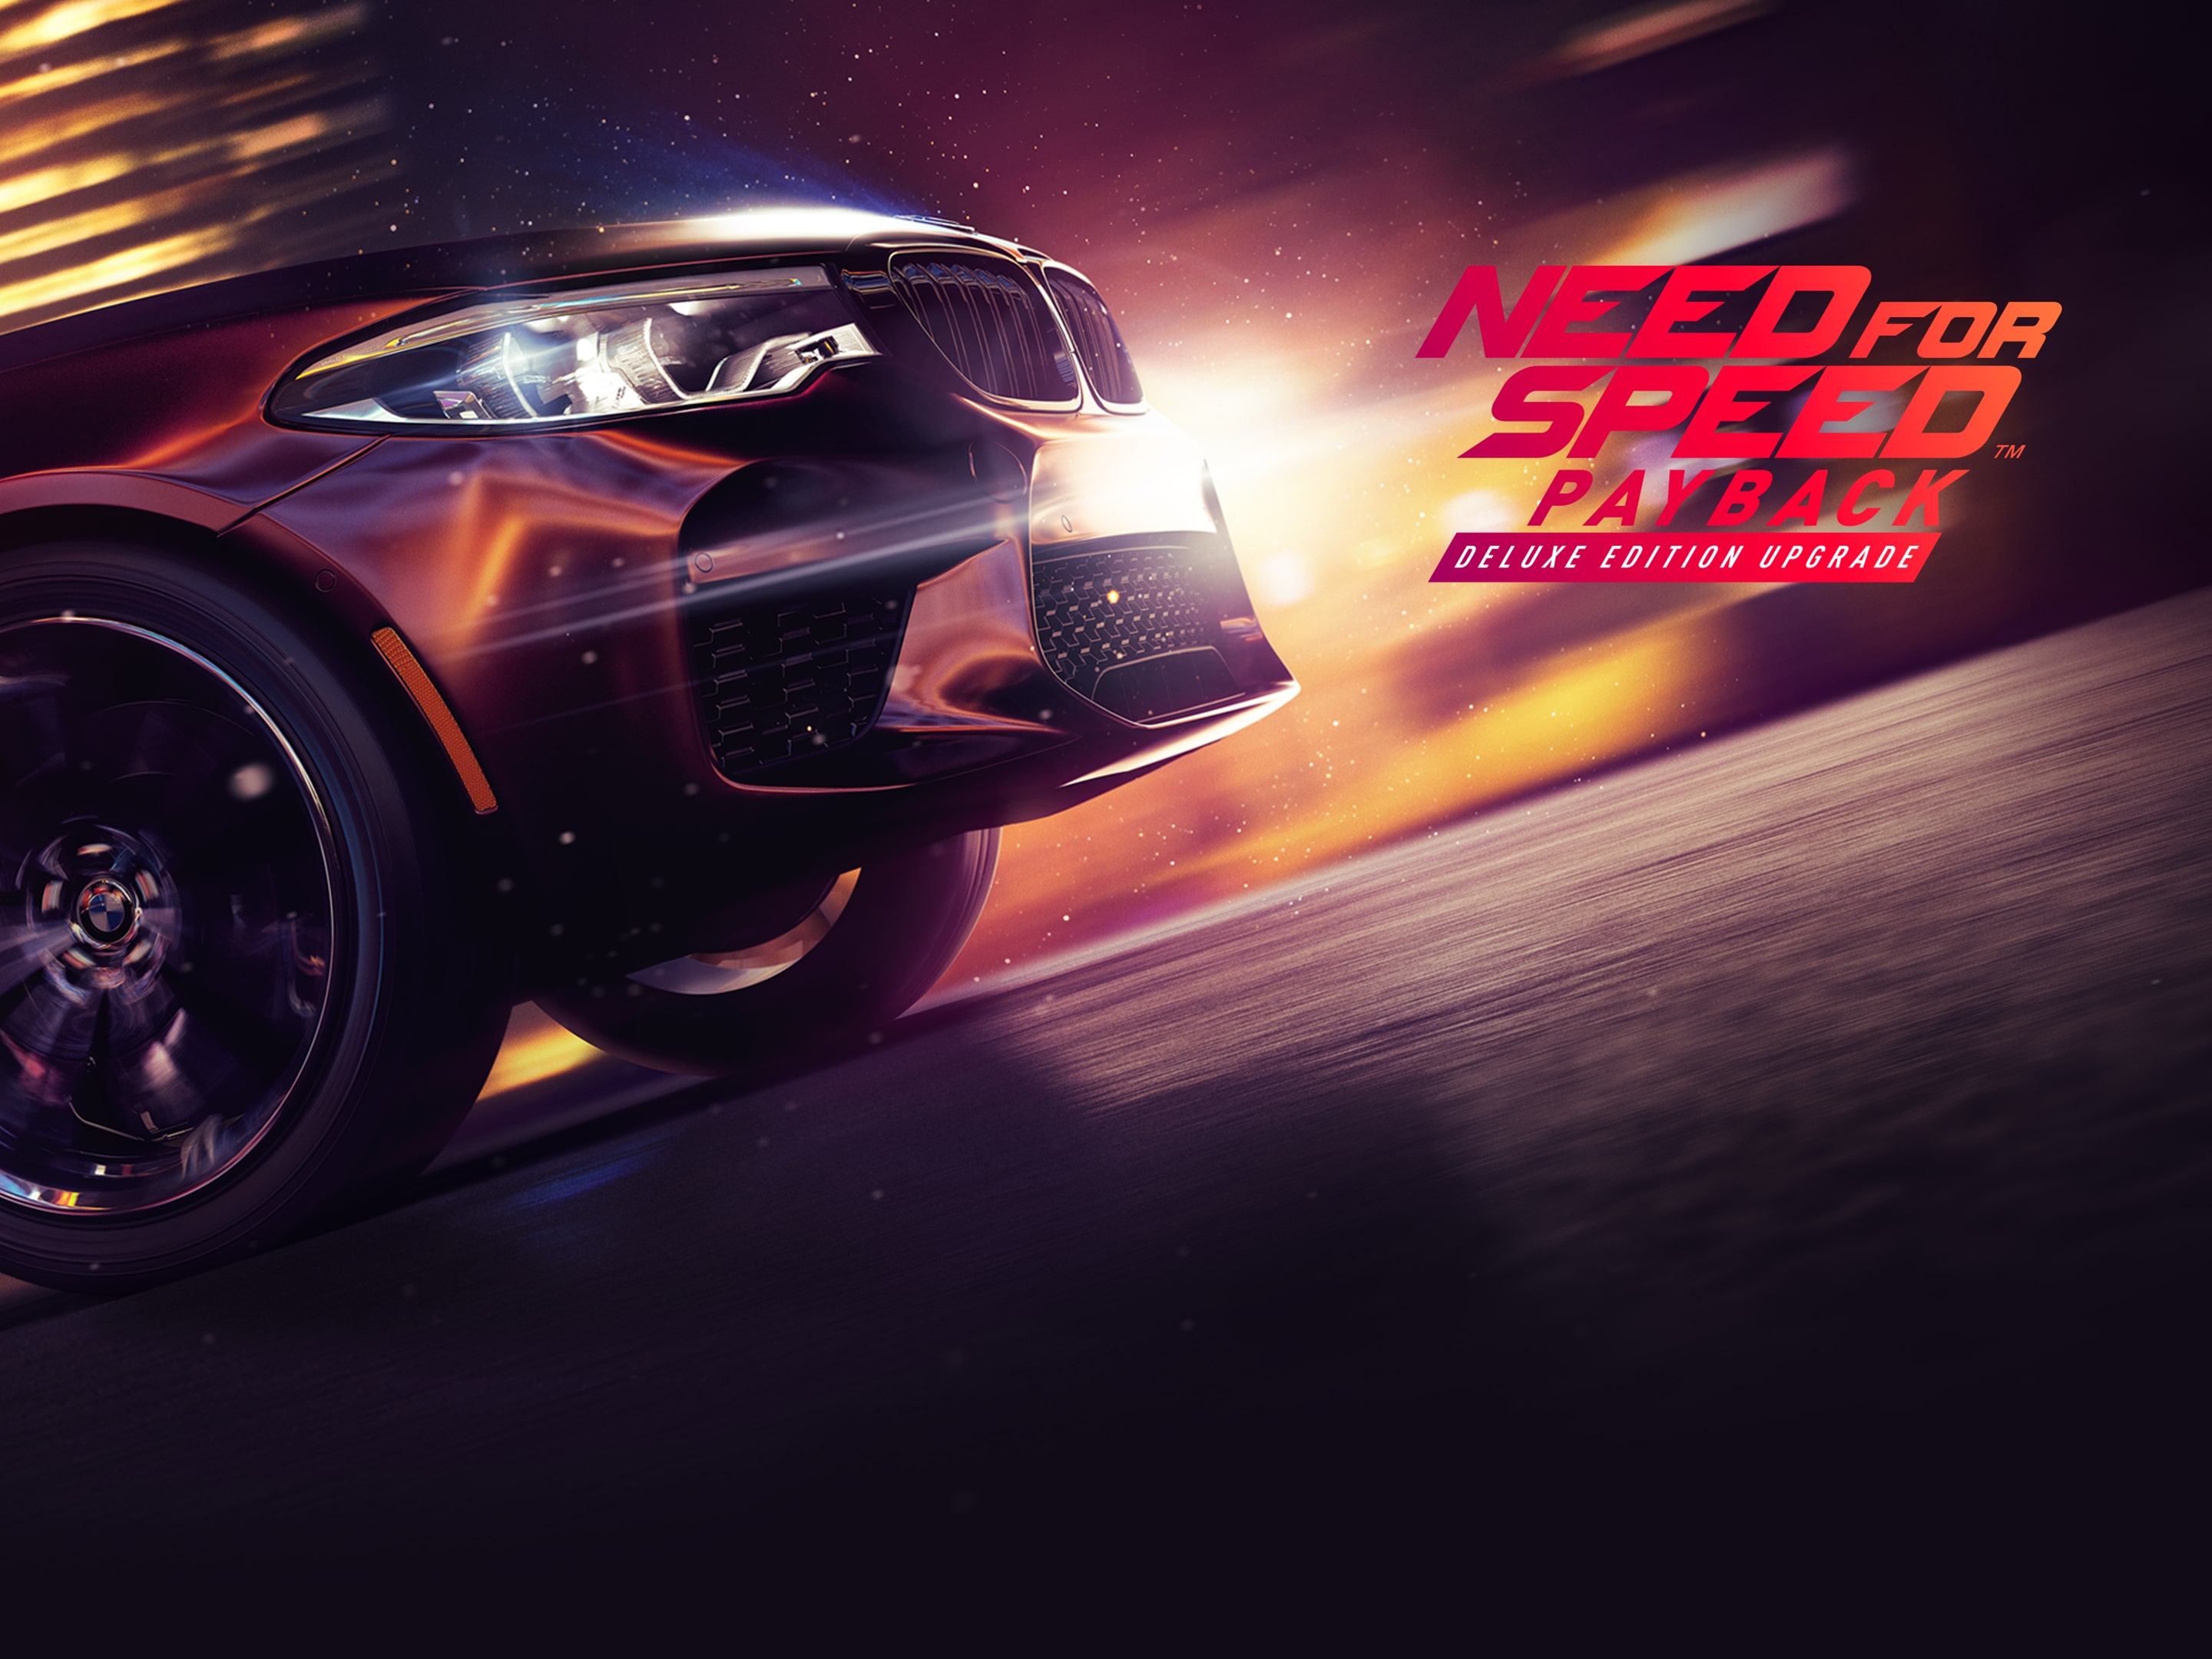 Need for Speed™ Deluxe Edition 2016. Nfs payback ps4